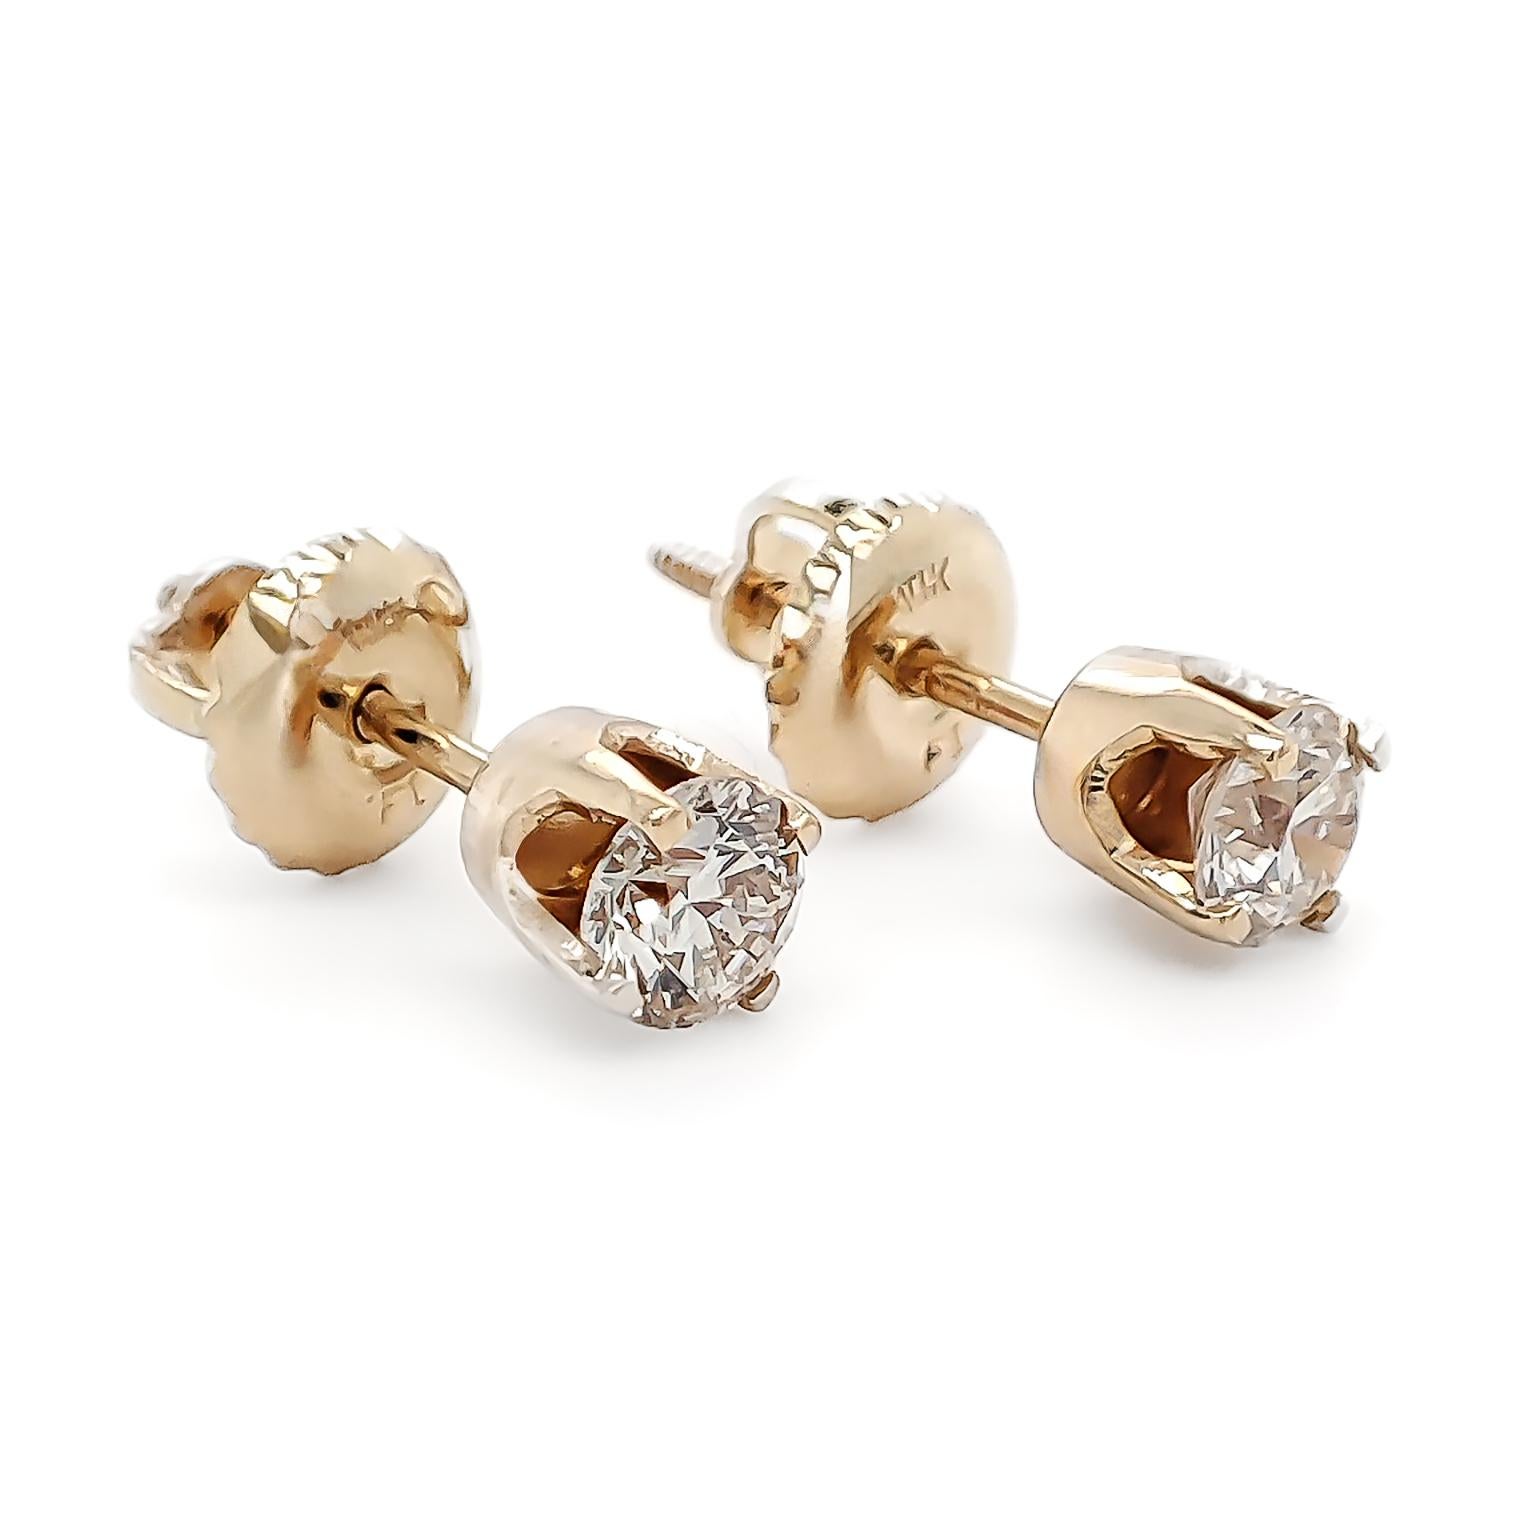 FOR U.S. BUYERS NO VAT 

If you want to add color to any style you choose, these 14kt diamond stud earrings weighing 0.79 grams are definitely for you. These gorgeous earrings feature two round brilliant cuts set in 14kt Yellow gold totaling